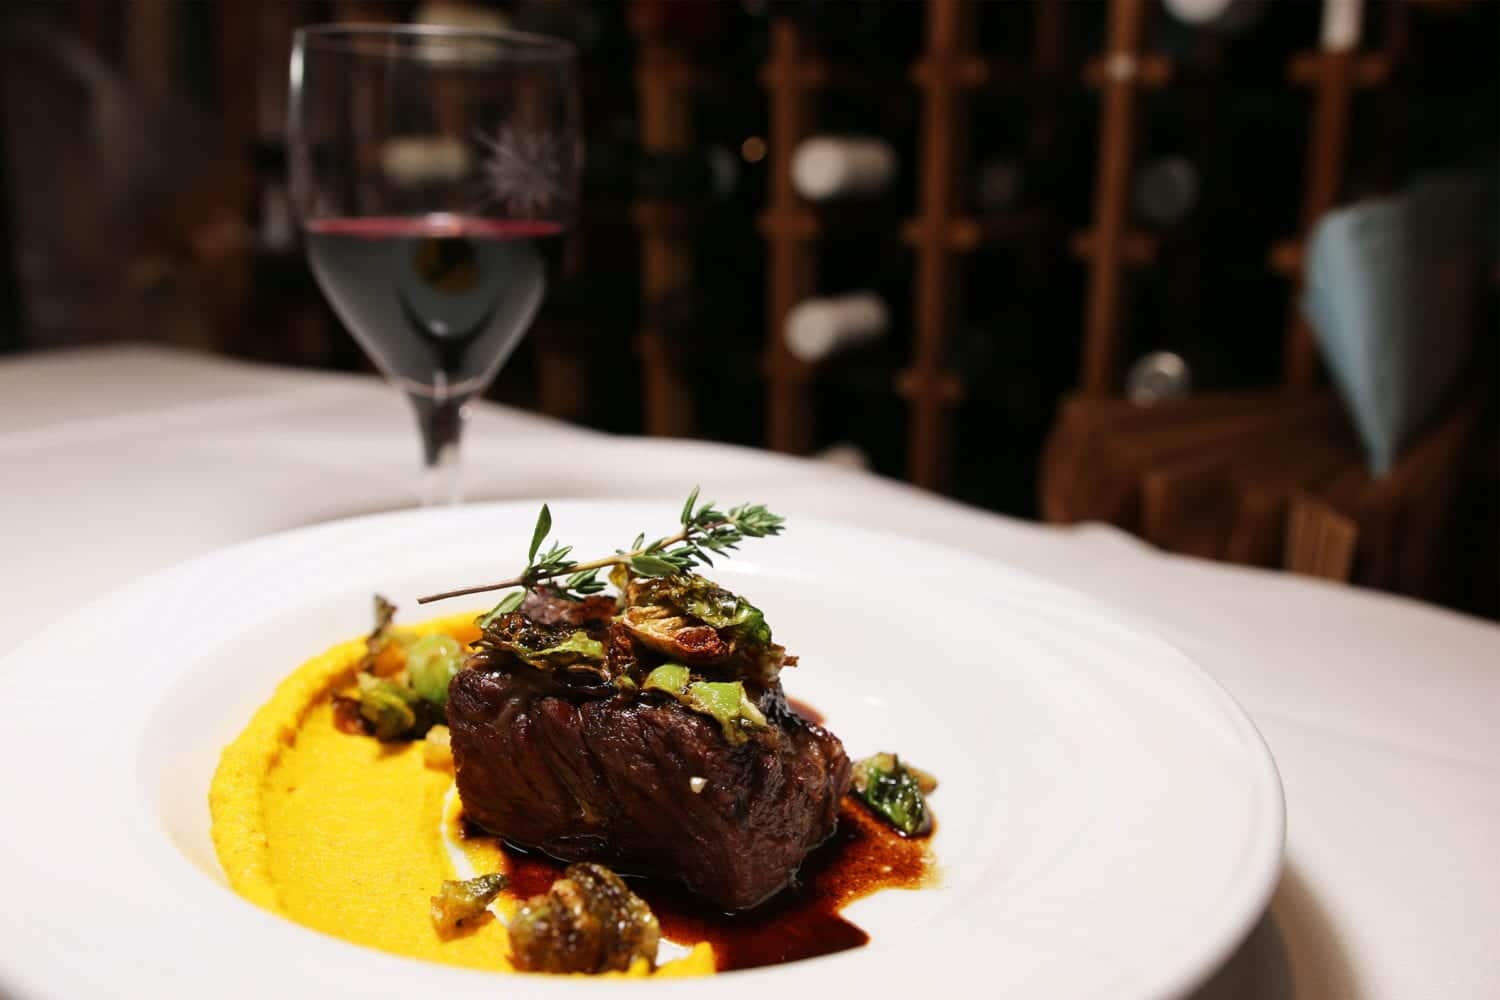 Beef Short Ribs topped with thyme on a white plate with wine glass in the background